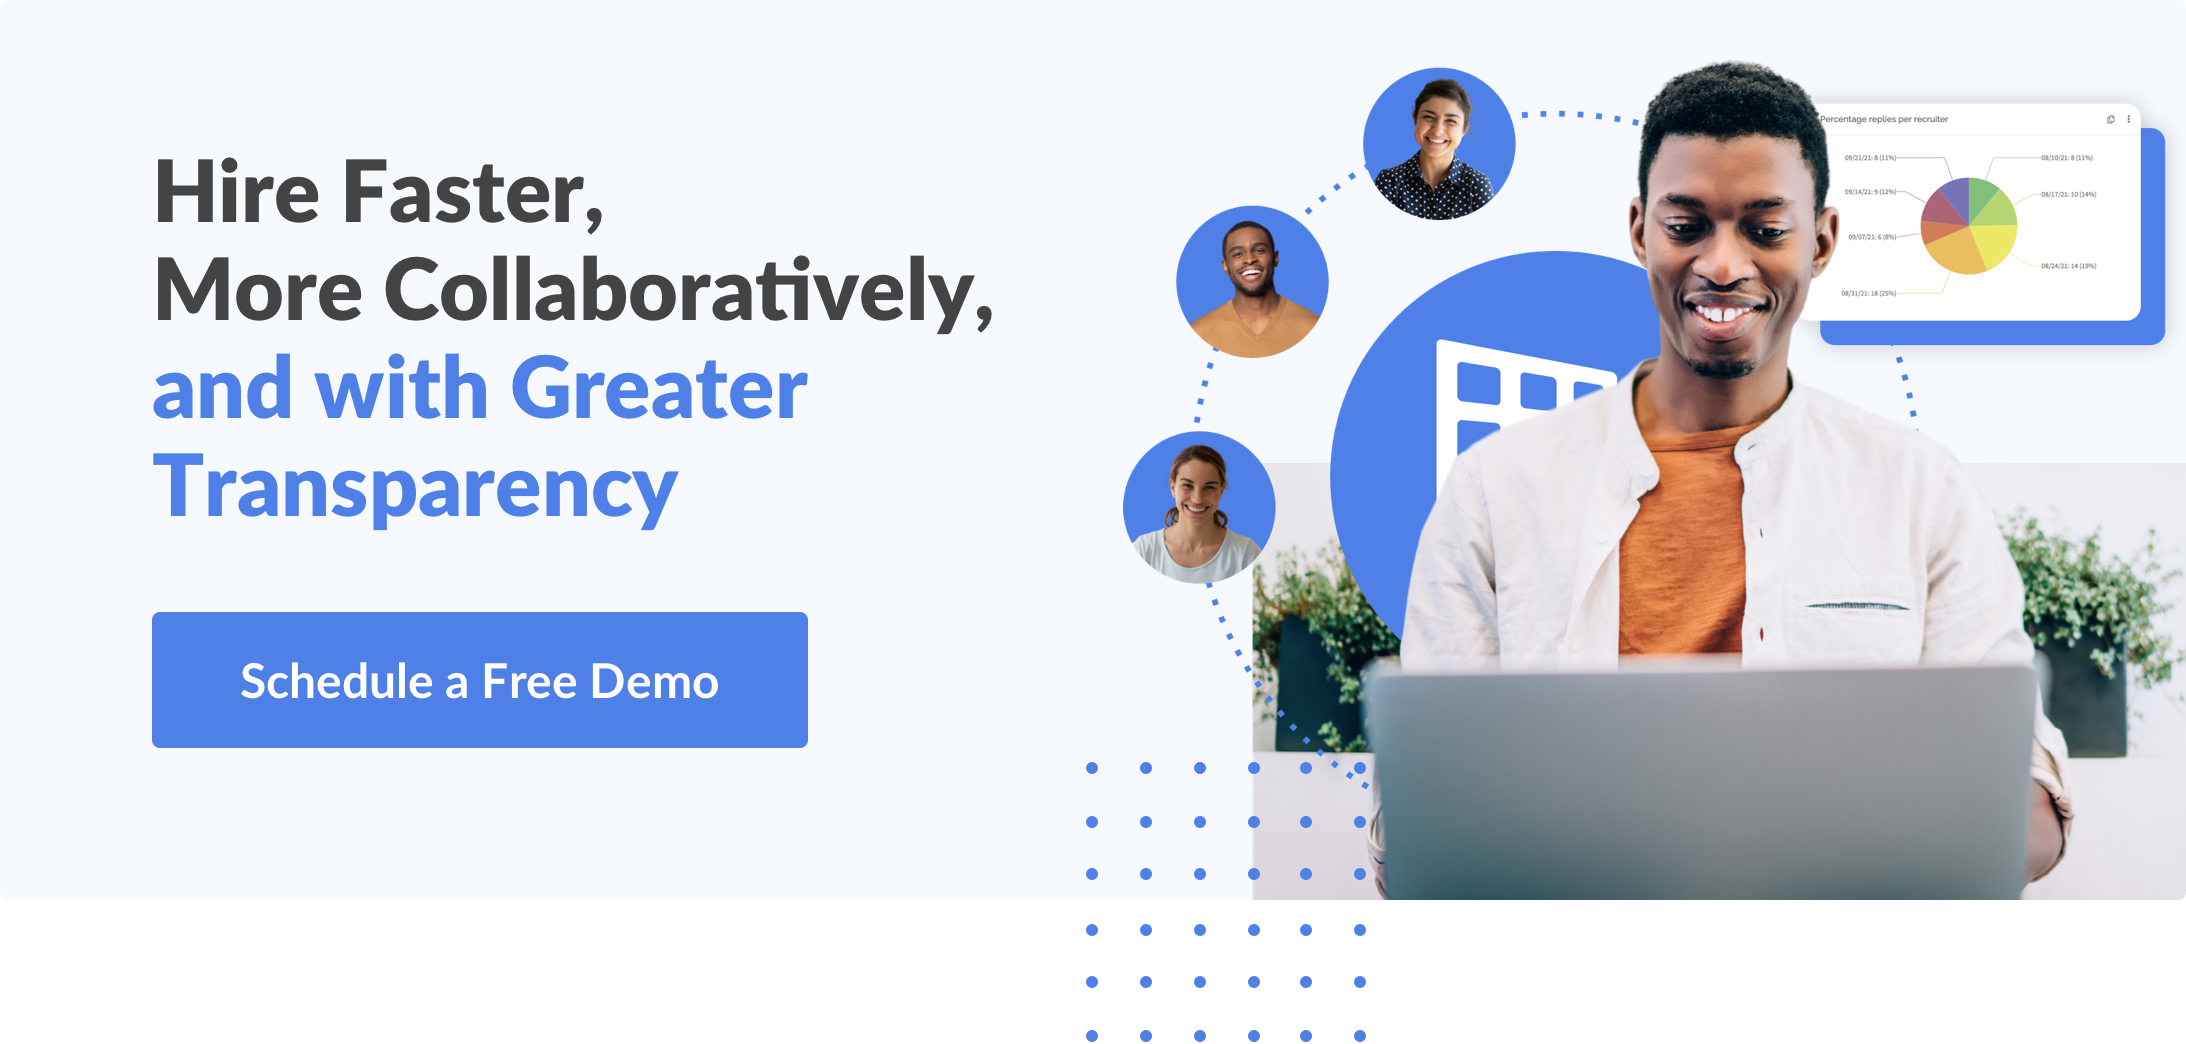 Hire collaboratively and with greater transparency. Schedule a free demo with TalentWall